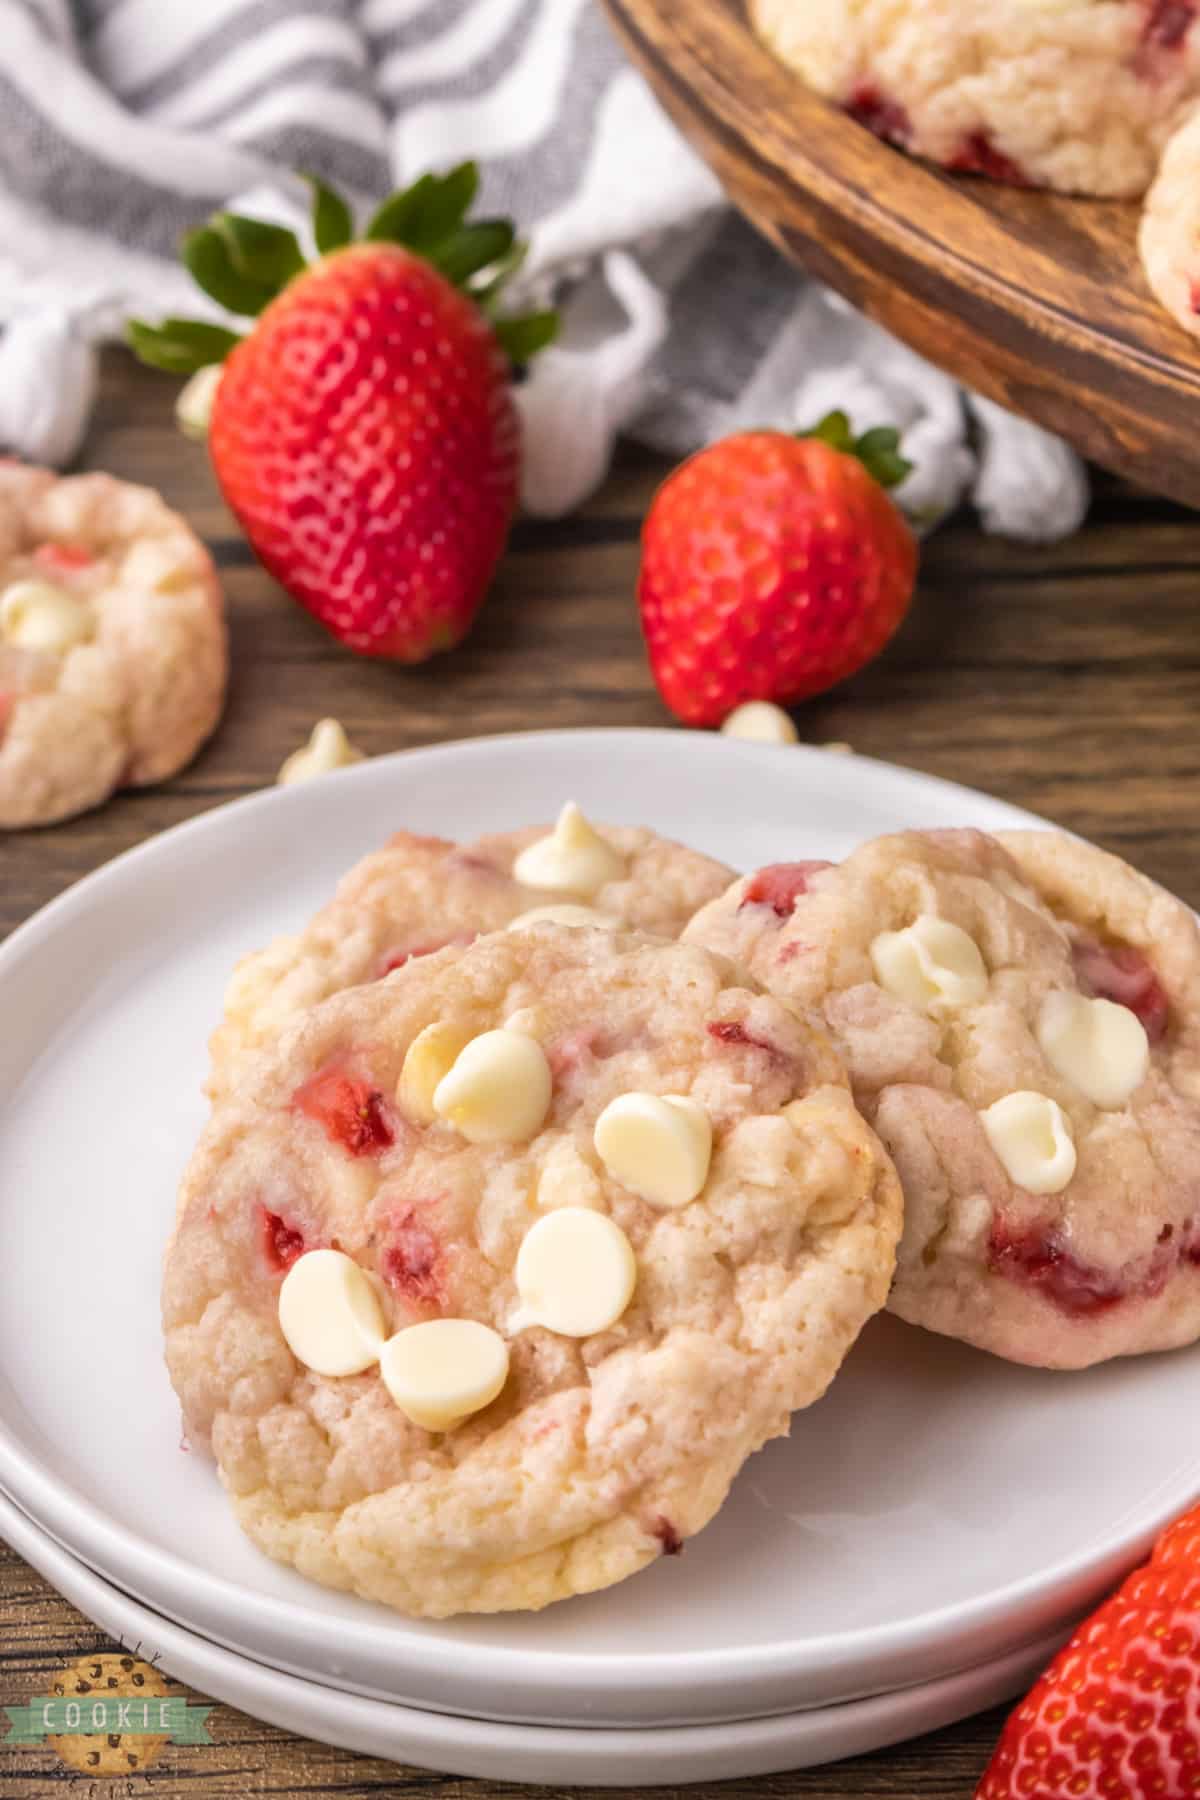 Strawberry Cookies made completely from scratch with fresh strawberries and white chocolate chips! Delicious strawberry cookie recipe made with simple ingredients. 